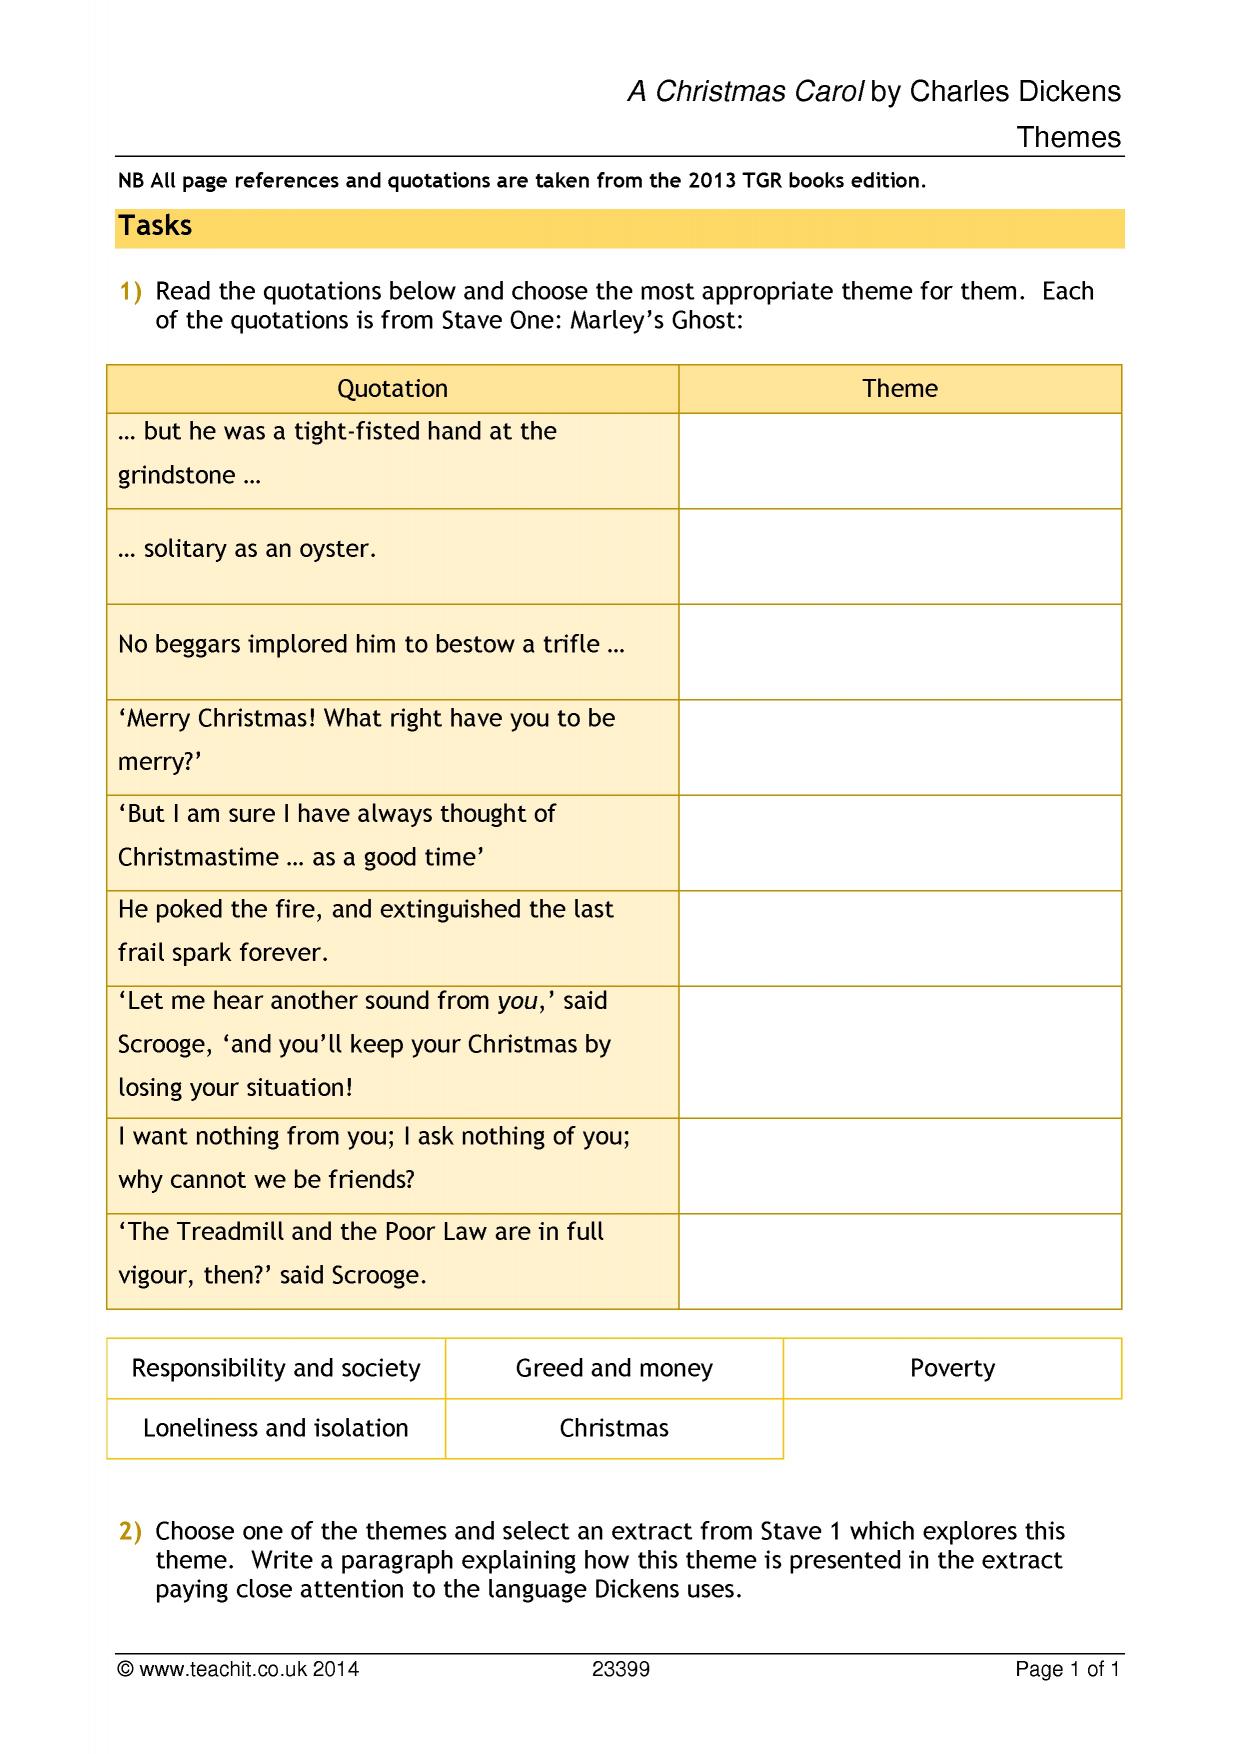  A Christmas  Carol  by Charles Dickens KS3 resources all 